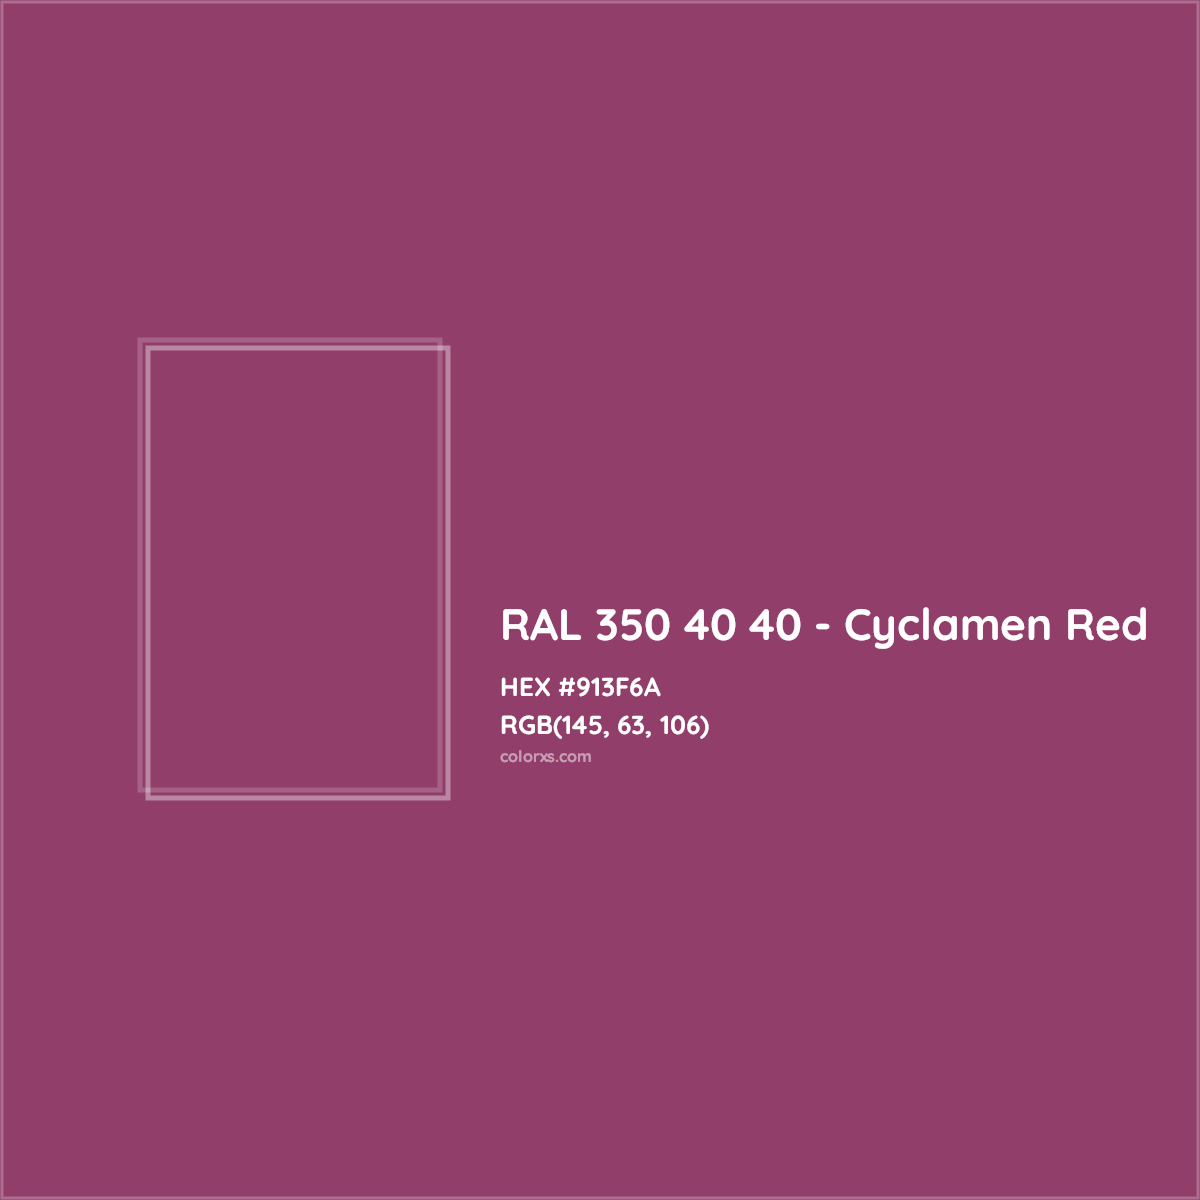 HEX #913F6A RAL 350 40 40 - Cyclamen Red CMS RAL Design - Color Code